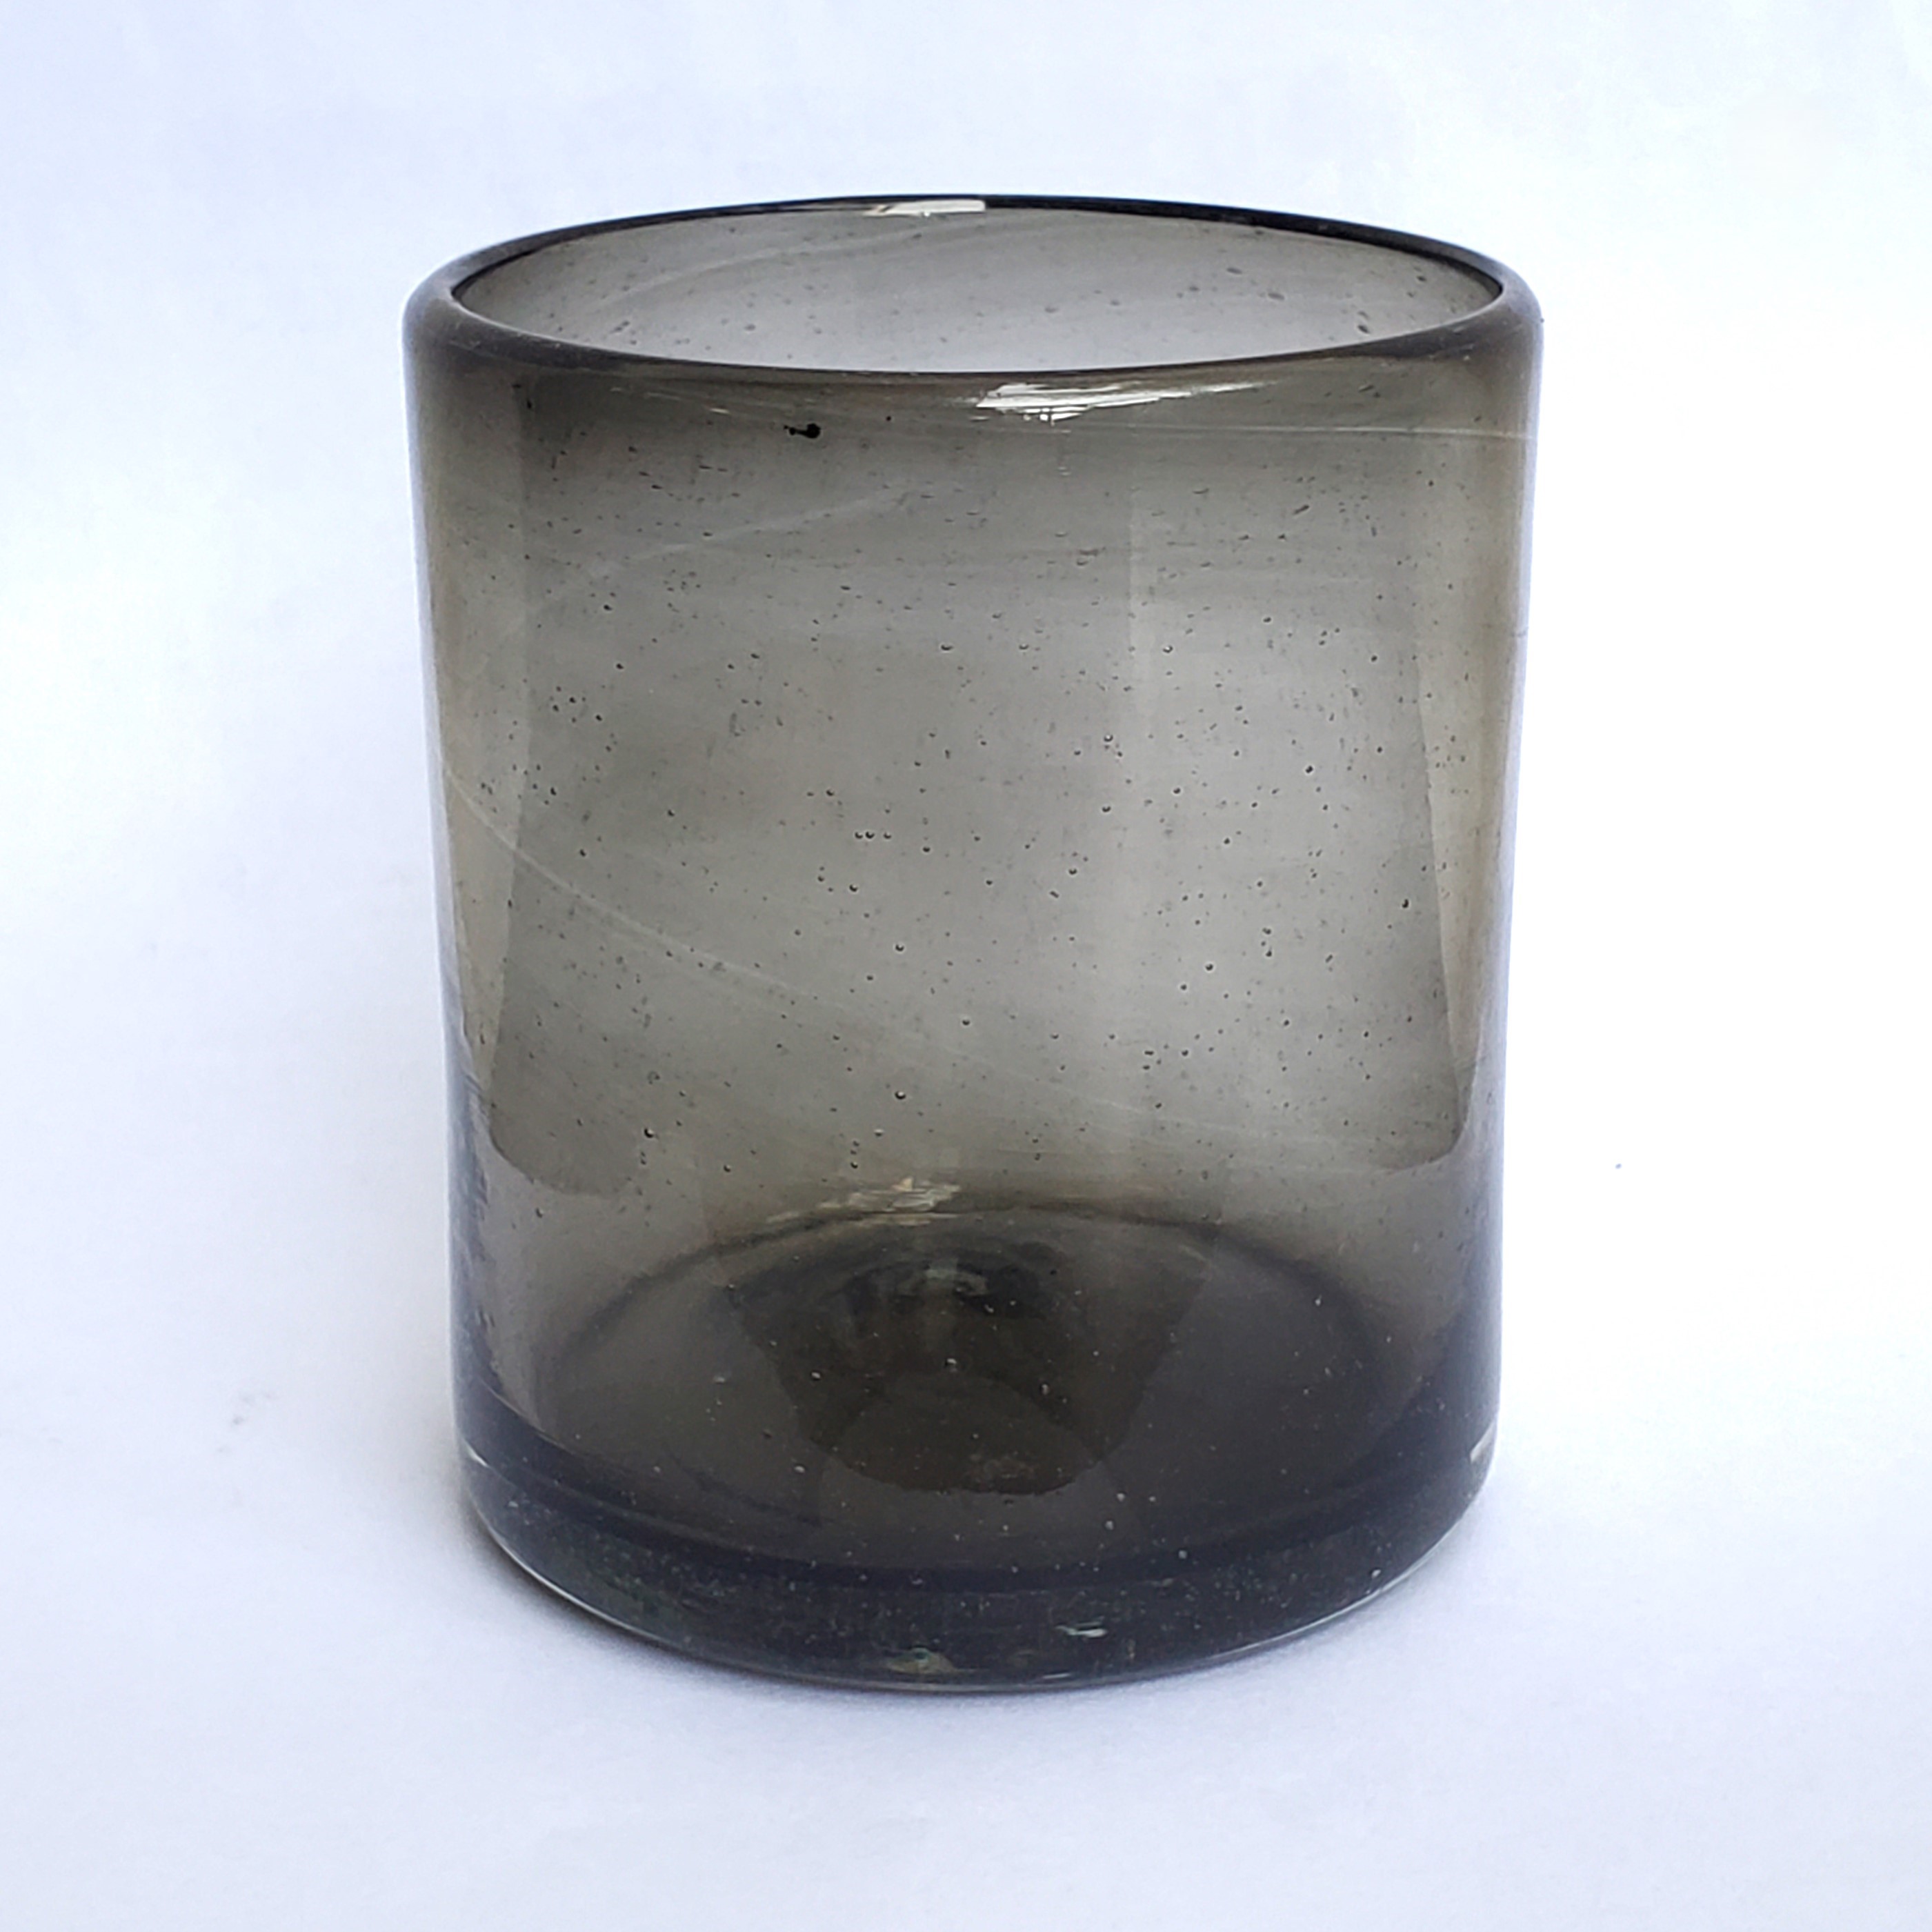 Novedades / Solid Humo Smoke Gray 9 oz Short Tumblers (set of 6) / Enhance your table setting with our beautiful Smoke Gray colored glasses, from the Humo collection.